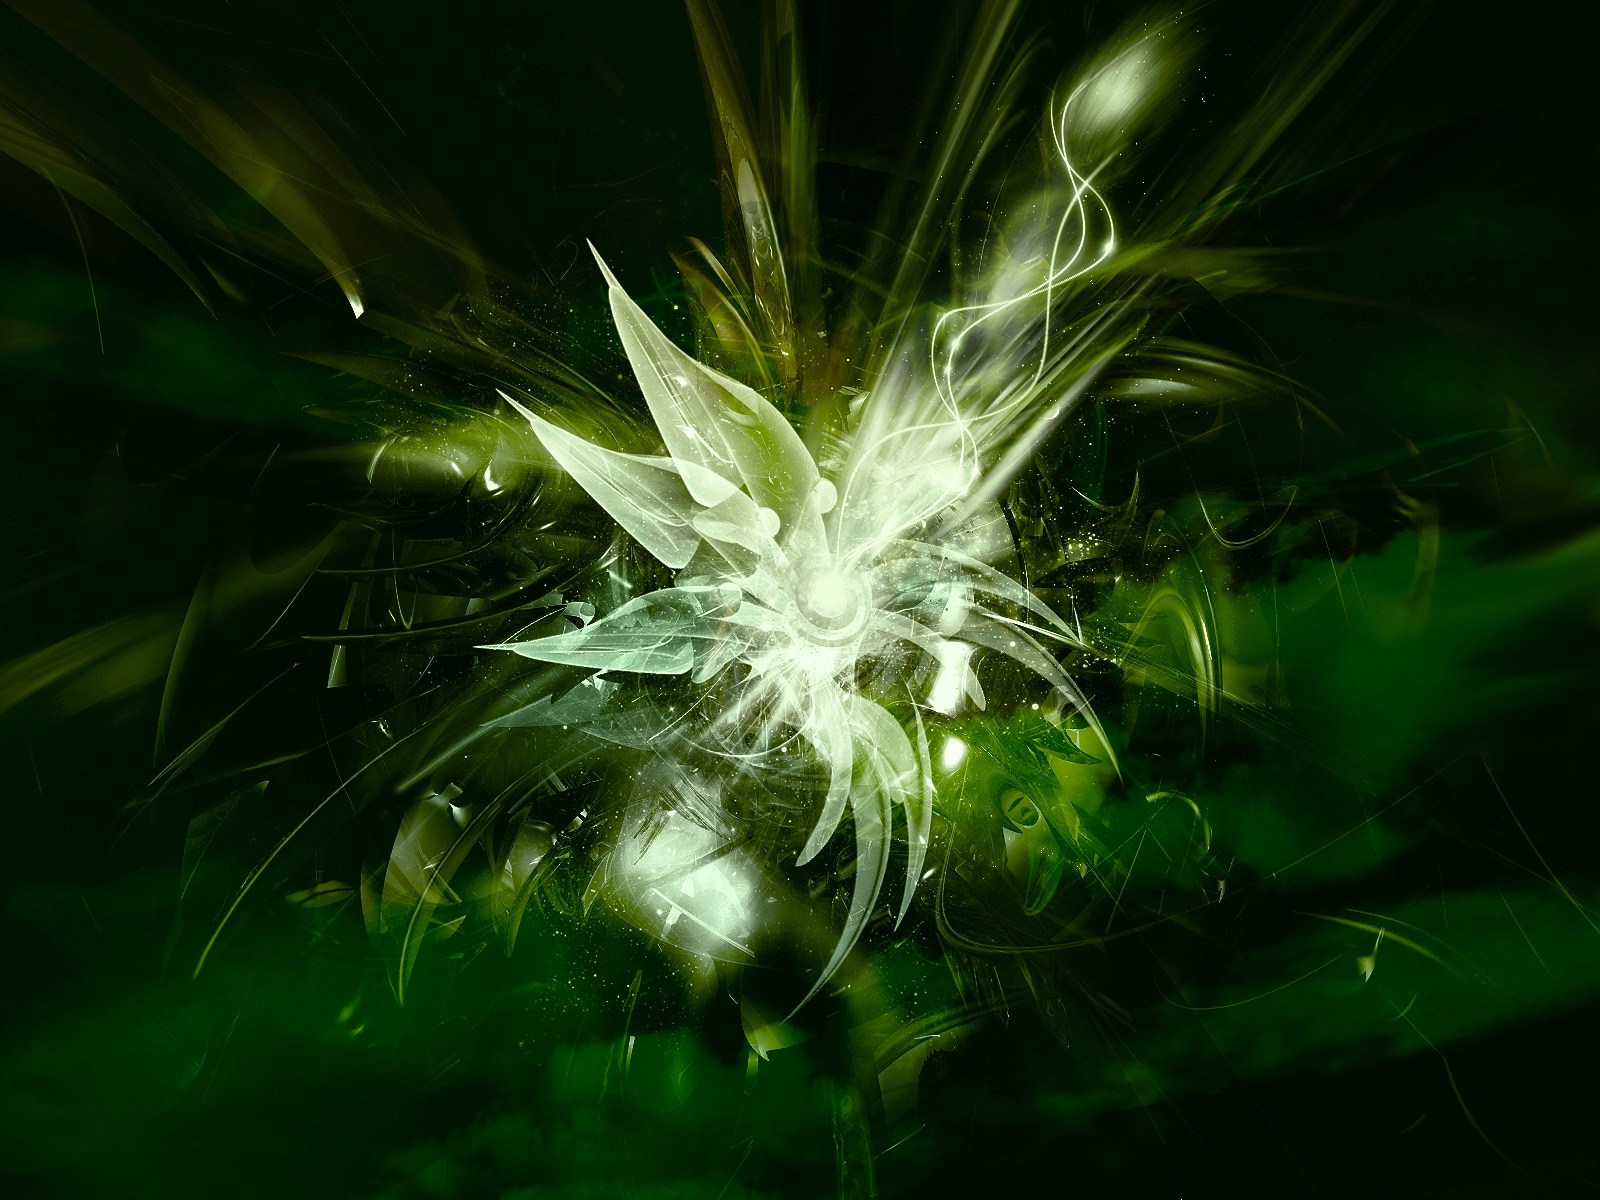 green, abstract, texture 1080p